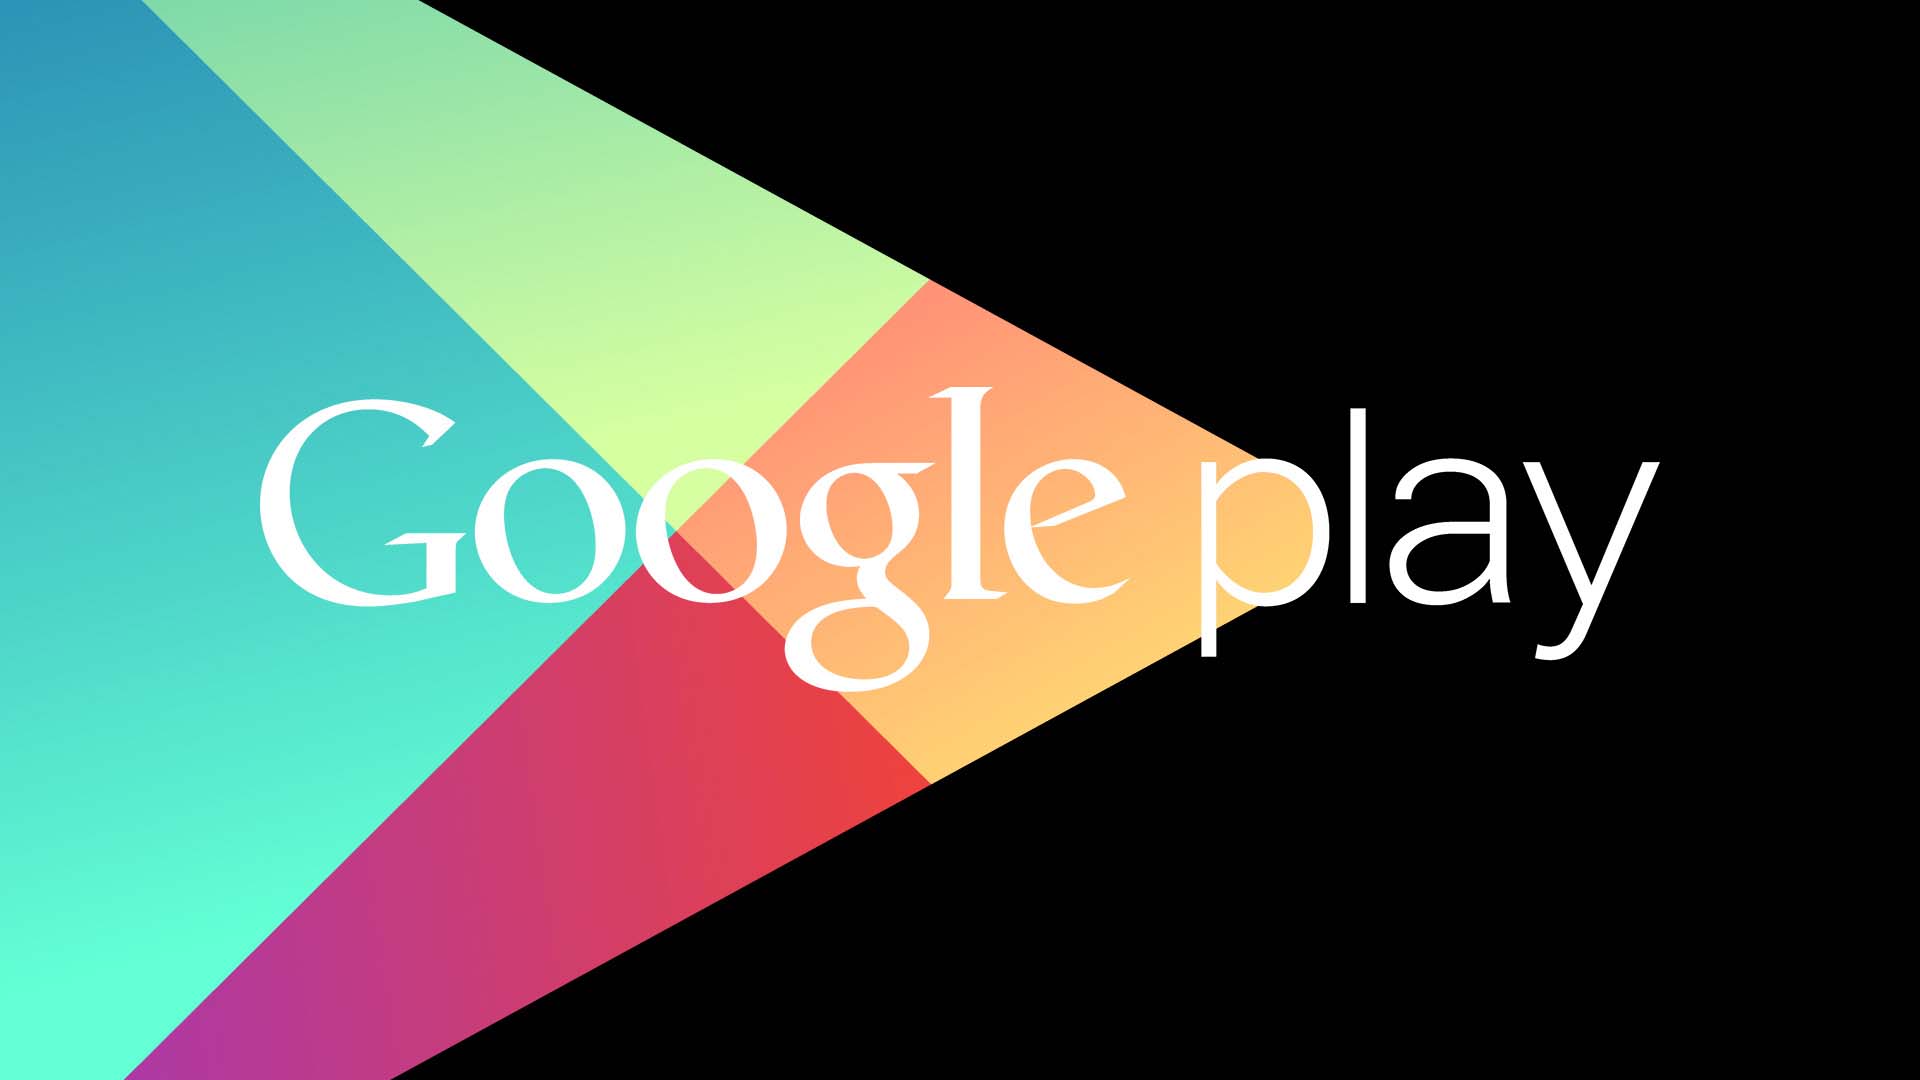 Google Play 7.2.13.J available for Android 4.0 Ice Cream Sandwich and above